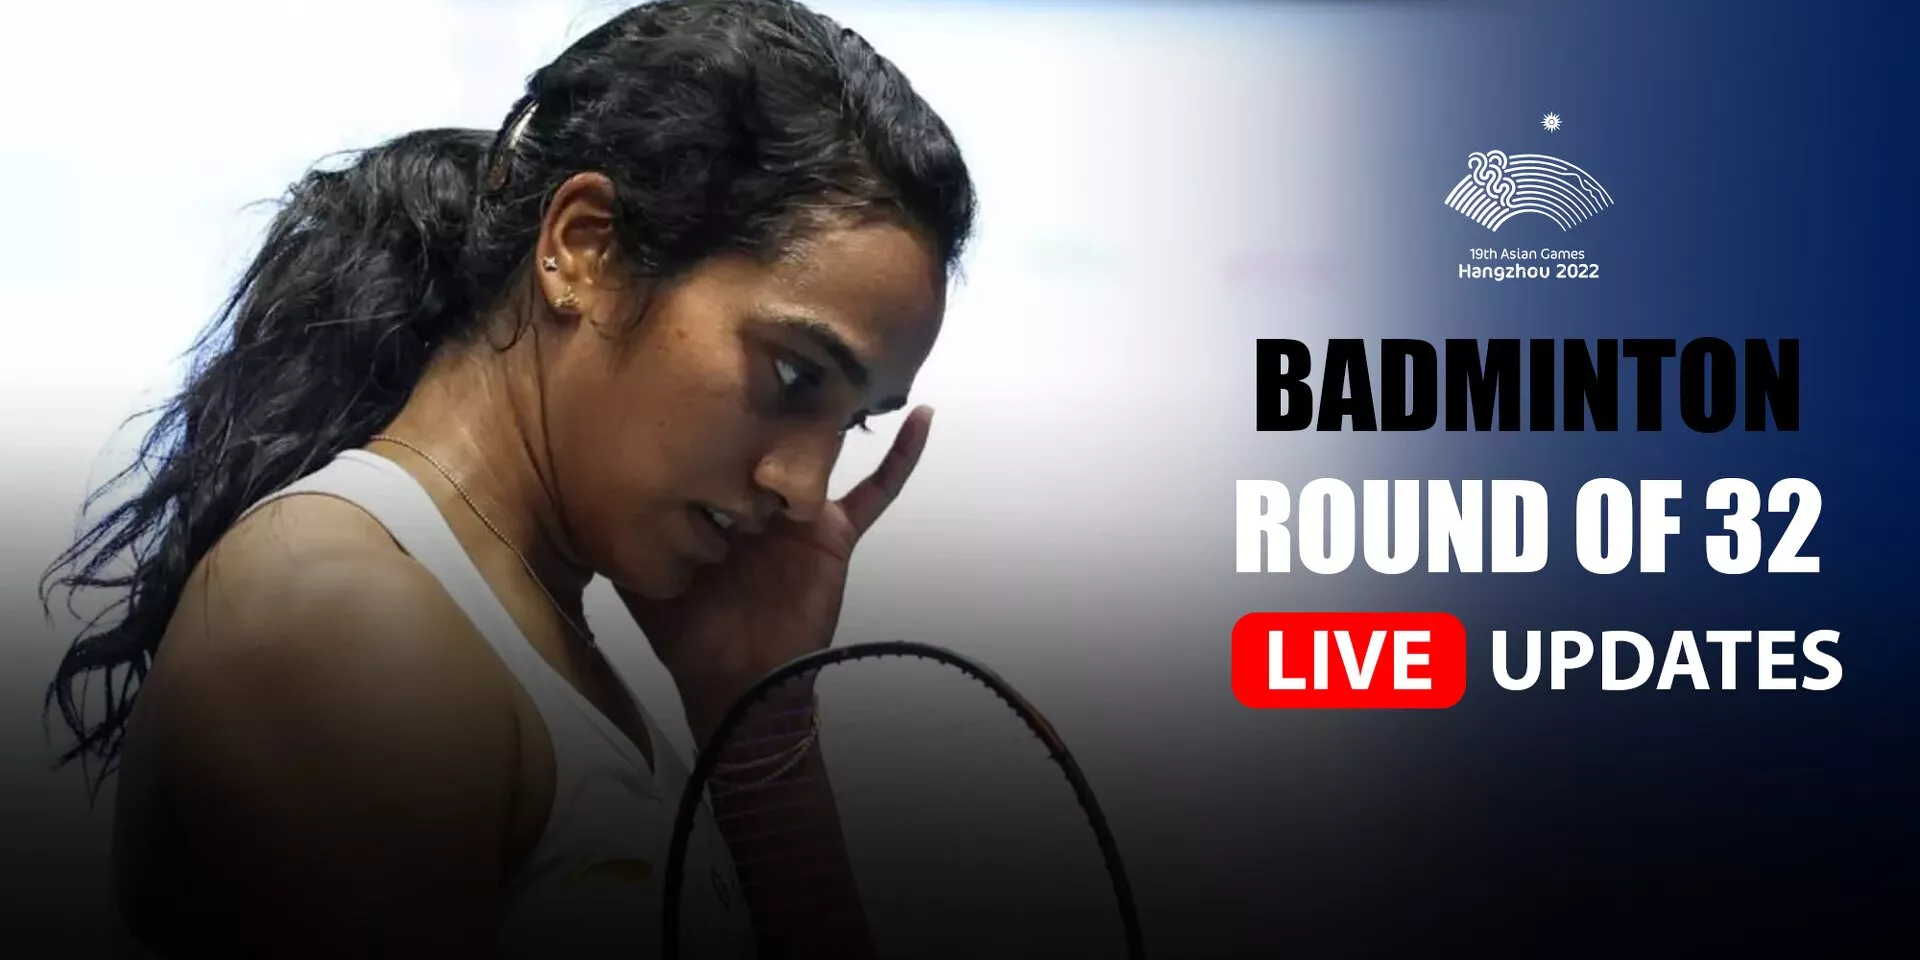 Asian Games 2023 Badminton: Round of 32 Live Updates